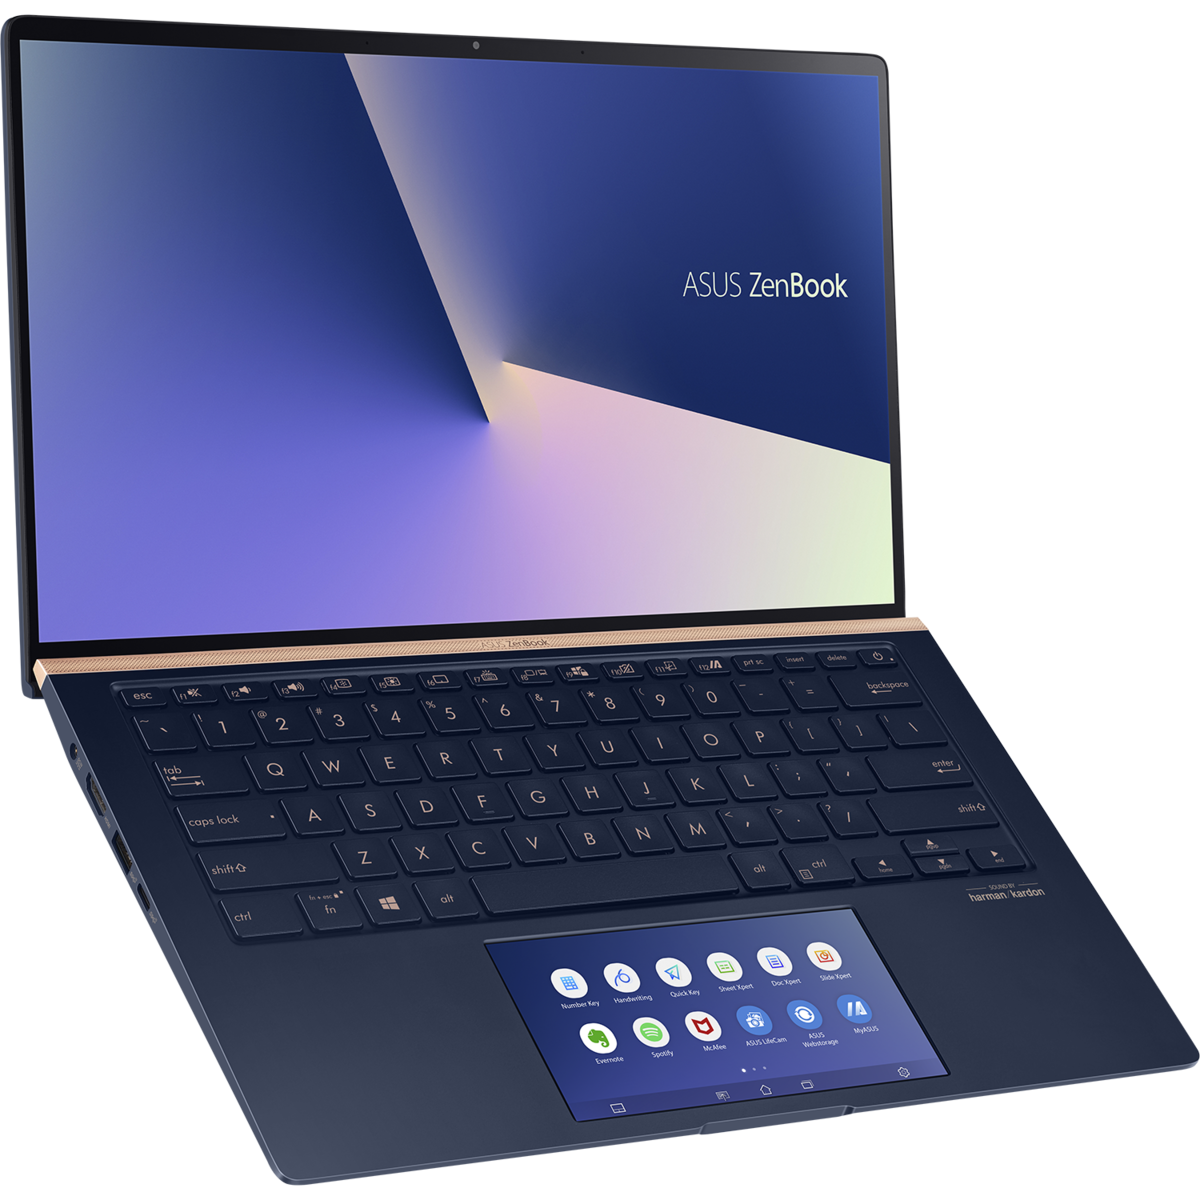 Asus announces the new ZenBook 13, 14, and 15 laptops